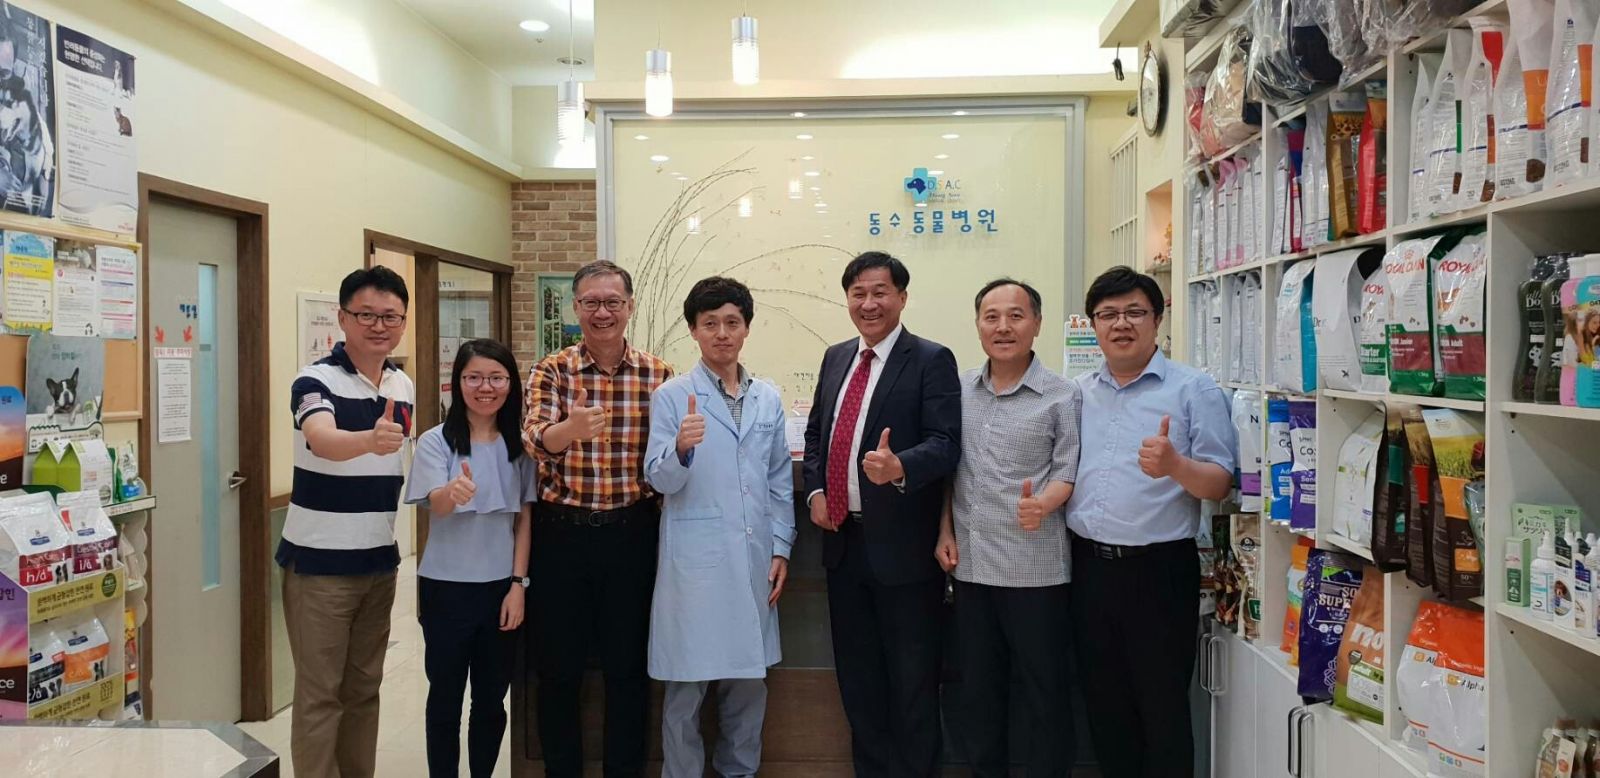 the animal hospital of the President of Incheon Veterinary Medical Association, Dr. Yun (middle)